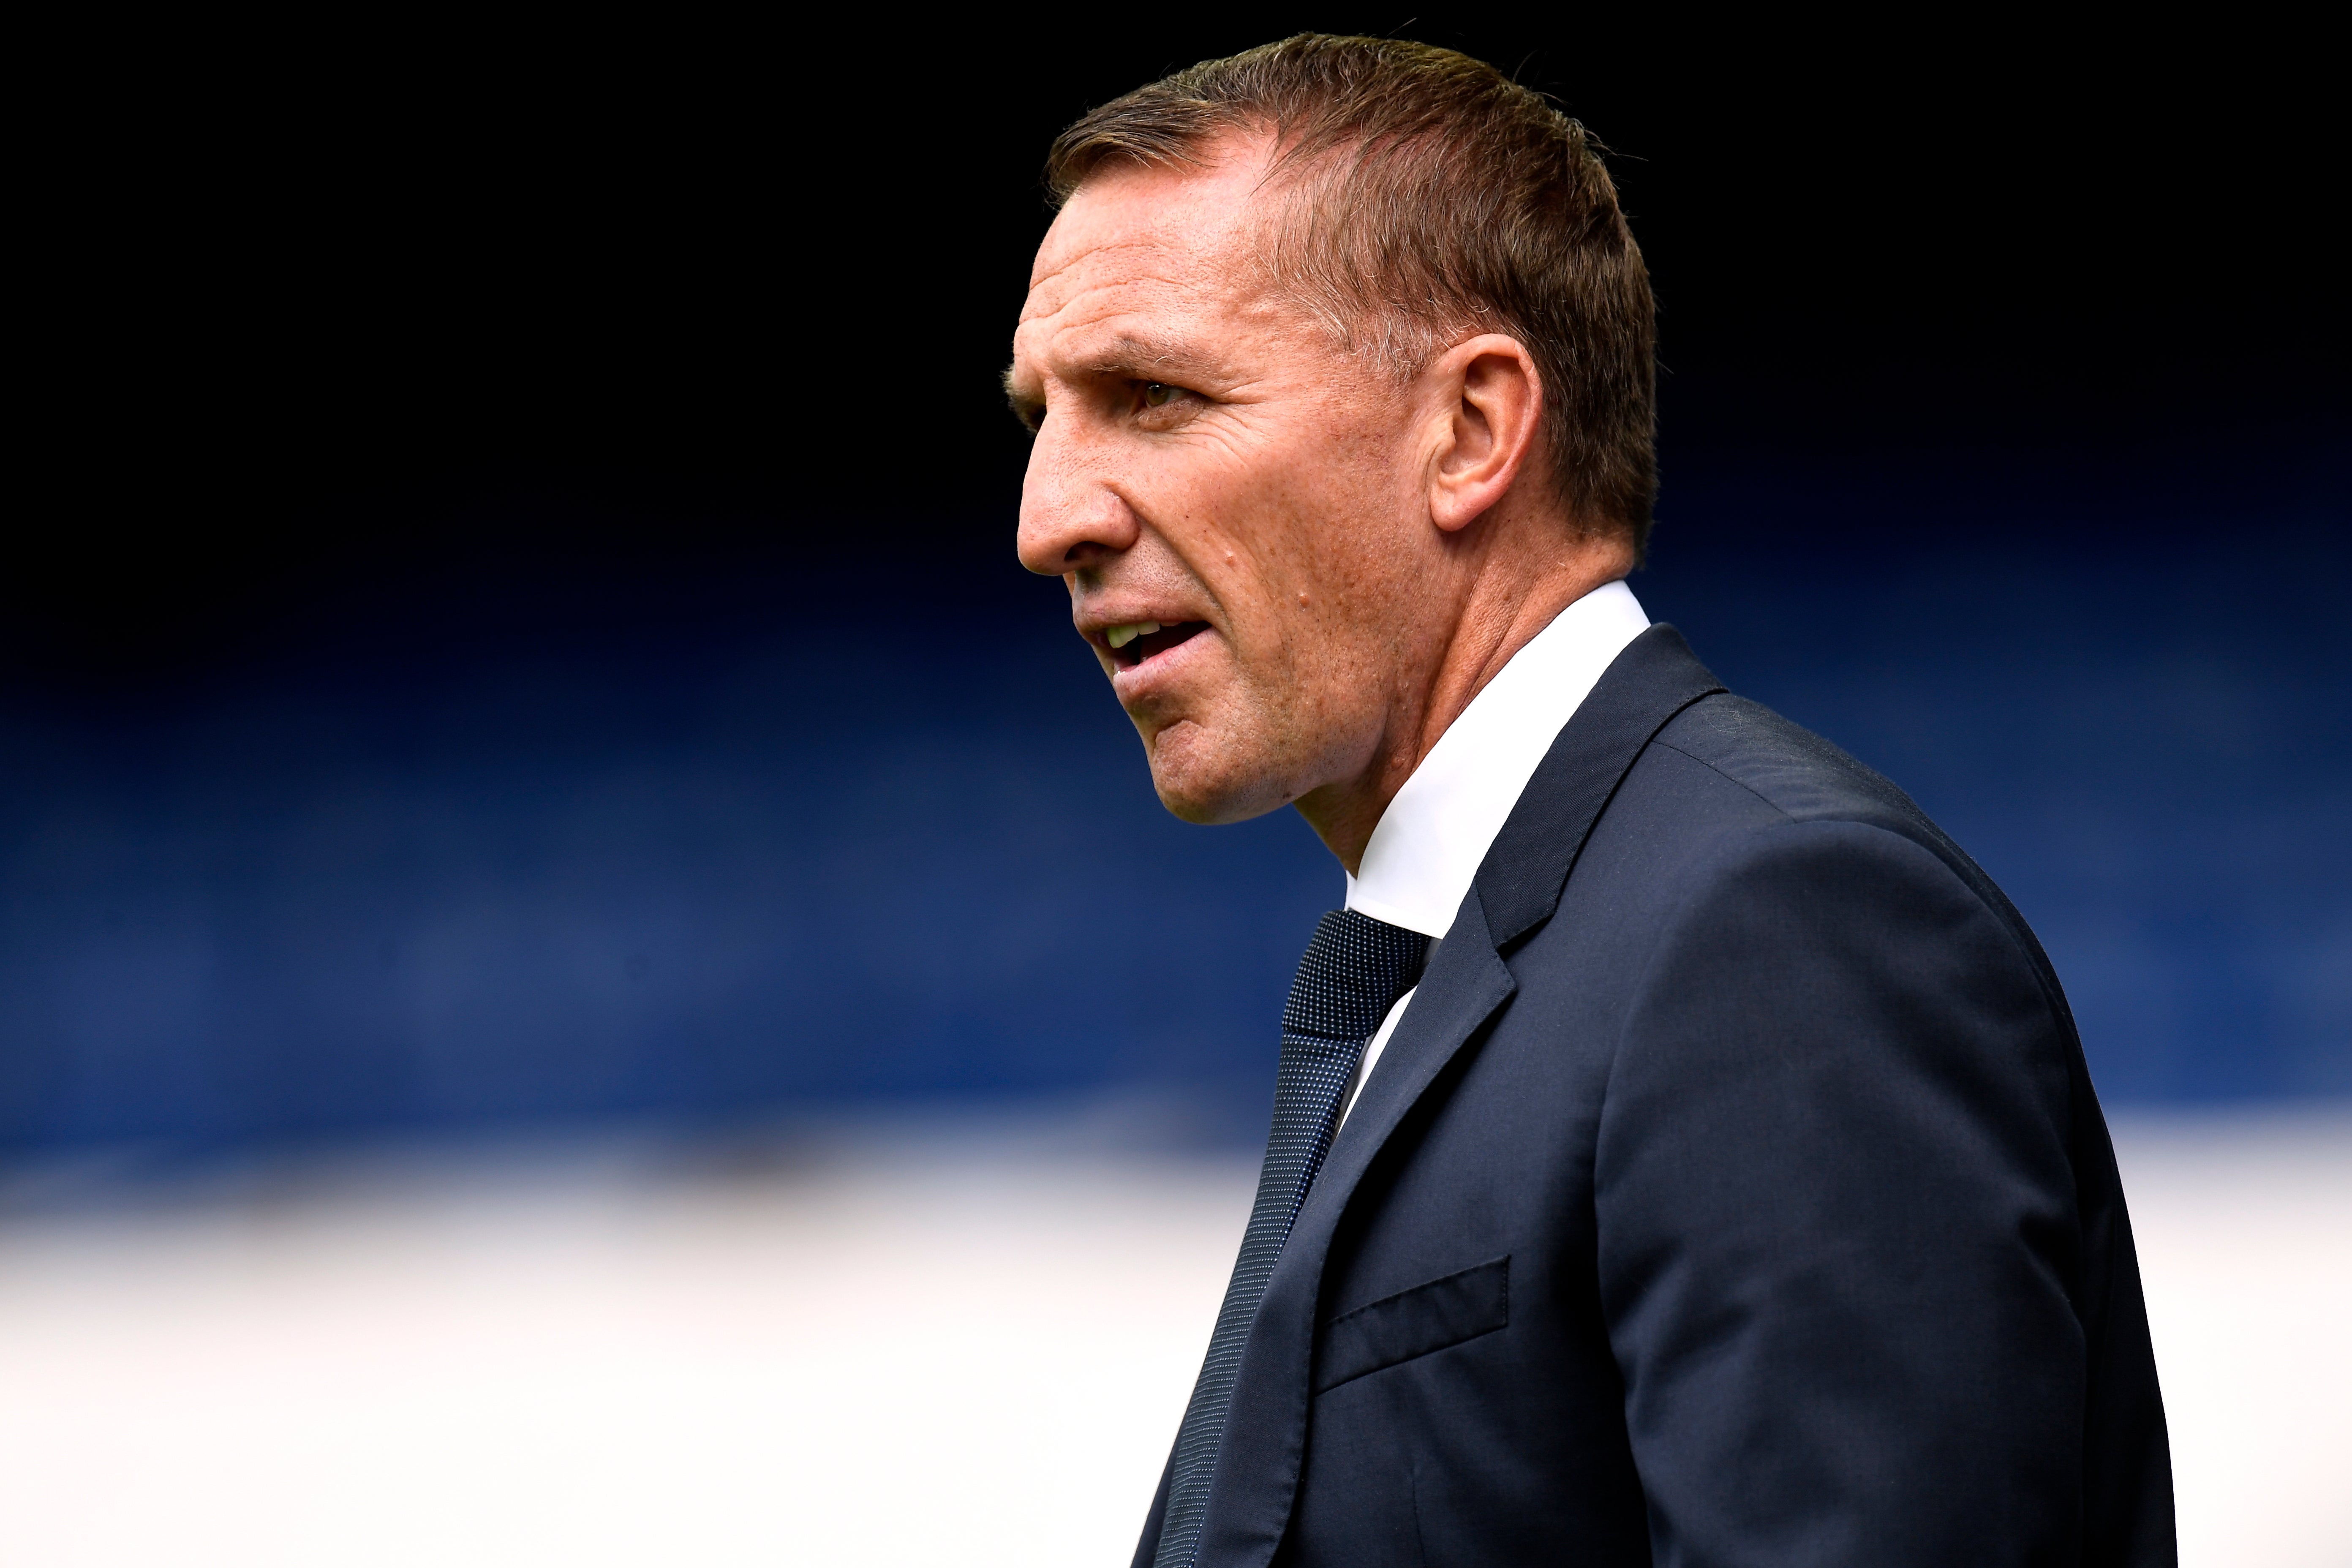 Rodgers is aiming to build on last season’s FA Cup victory